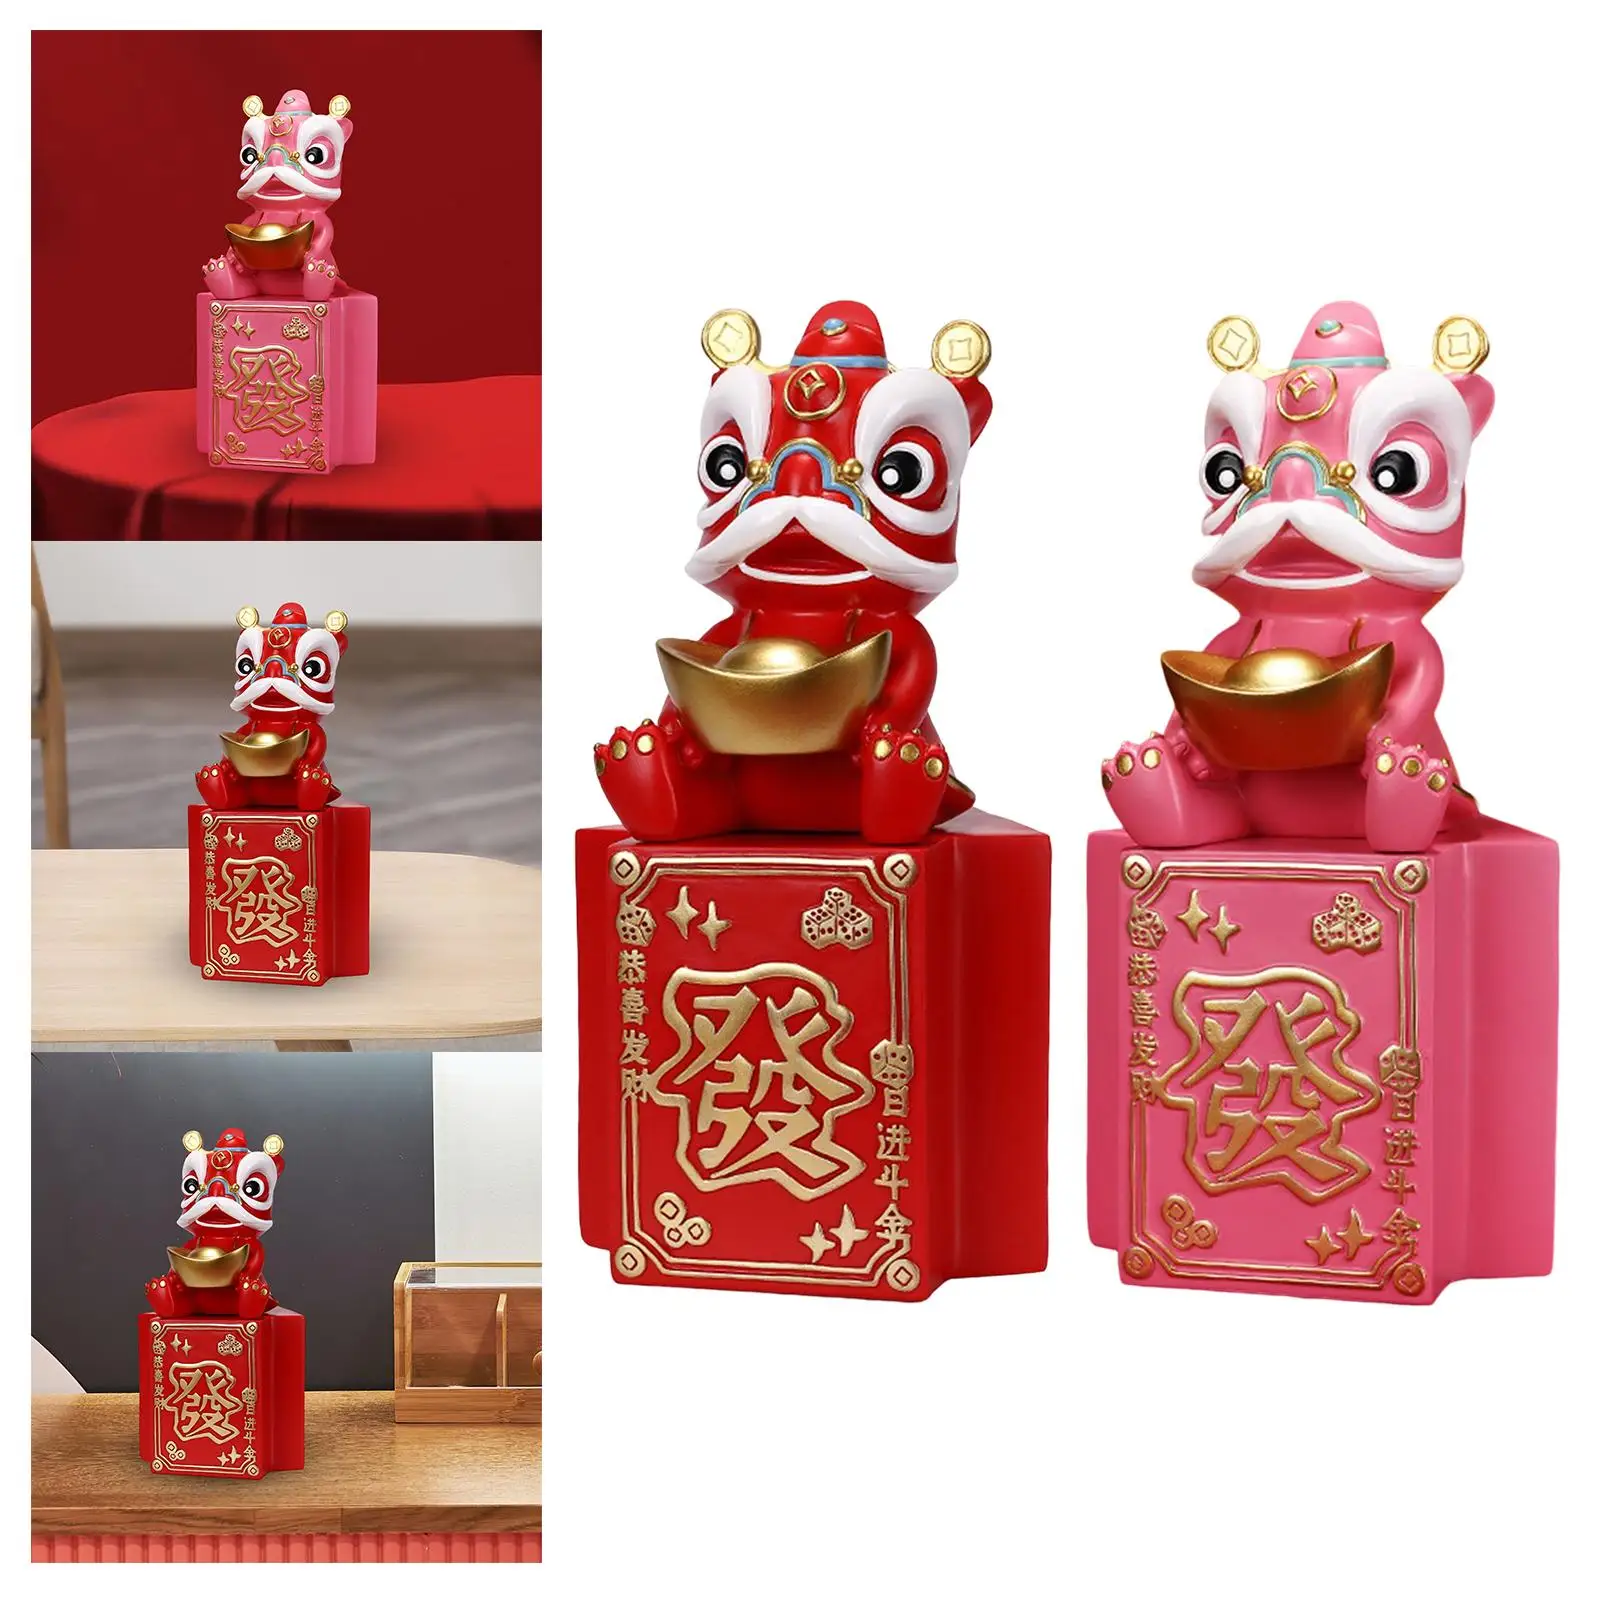 Resin Chinese Piggy Bank Figurine Feng Shui Statue Sculpture Saving Box for Living Room Office Home Decor Ornament